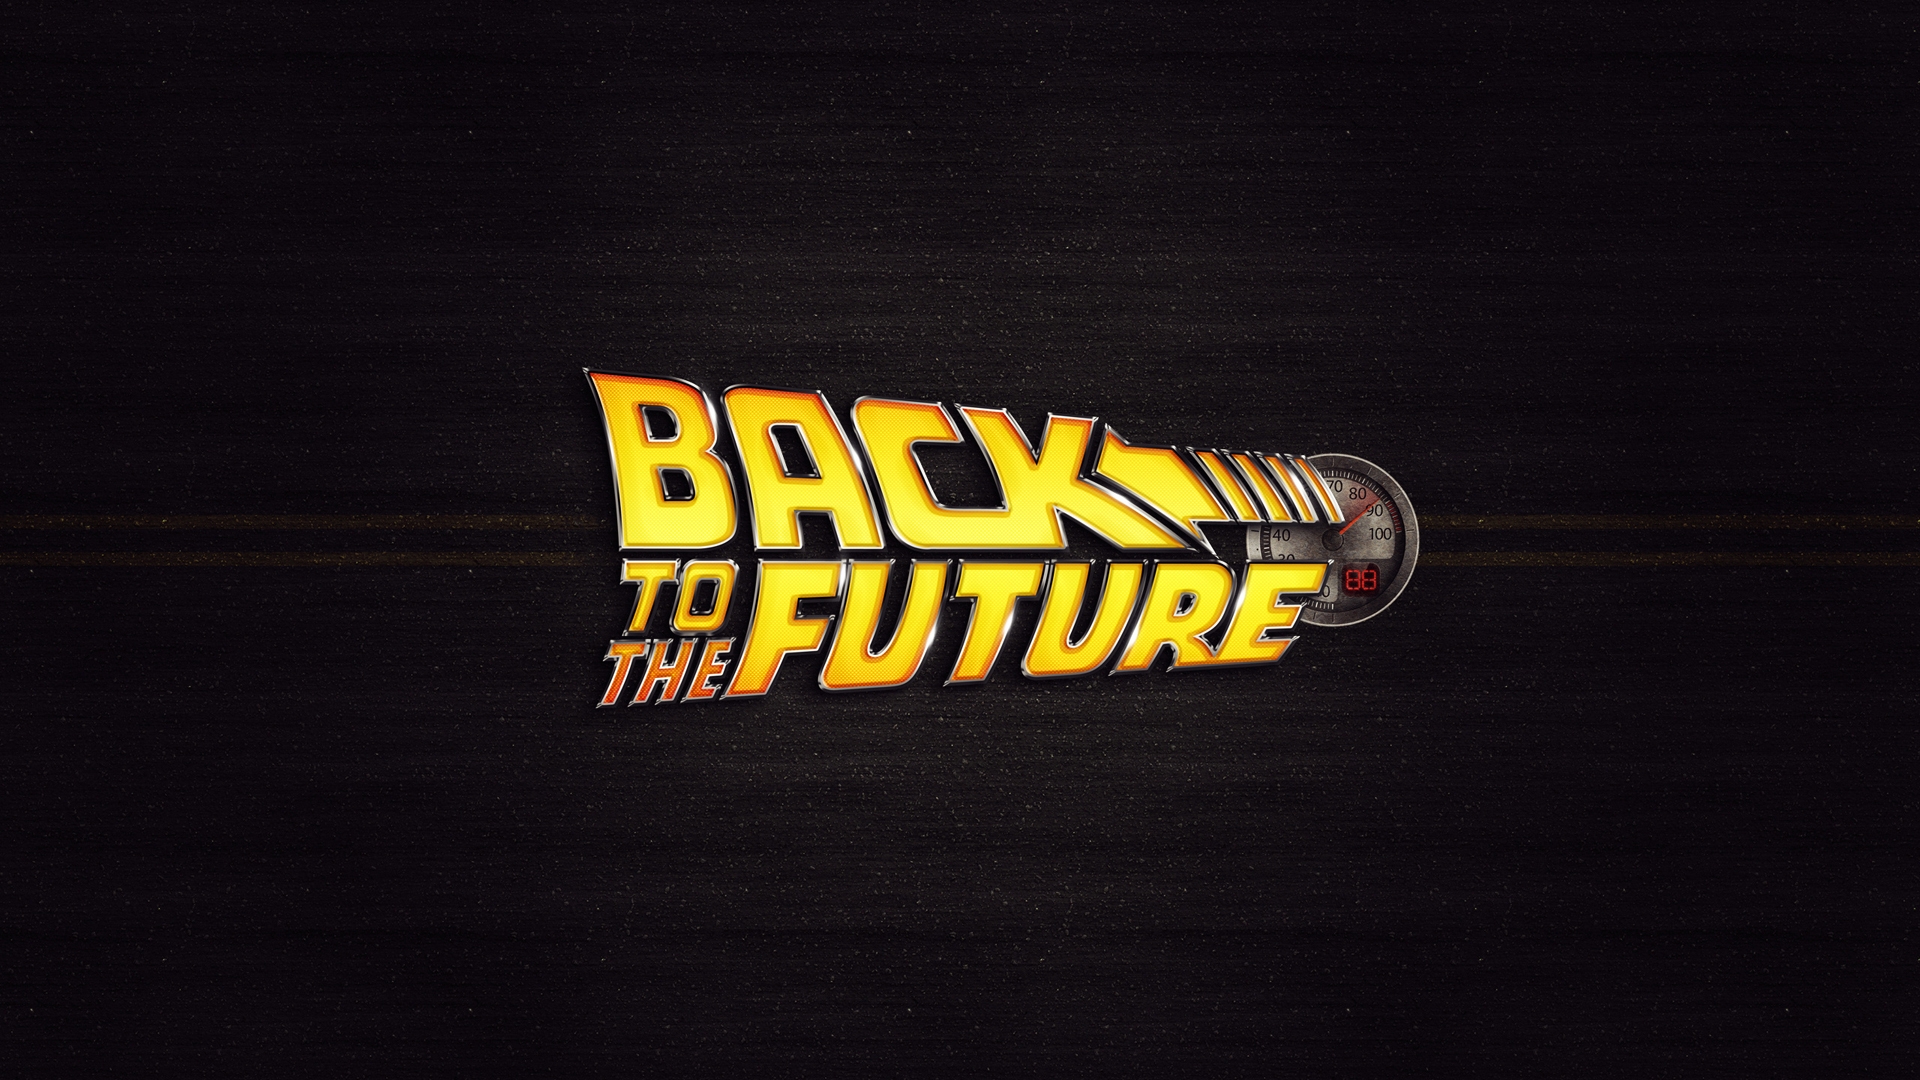 Home Movies HD Wallpapers Back To The Future Movie Wallpaper